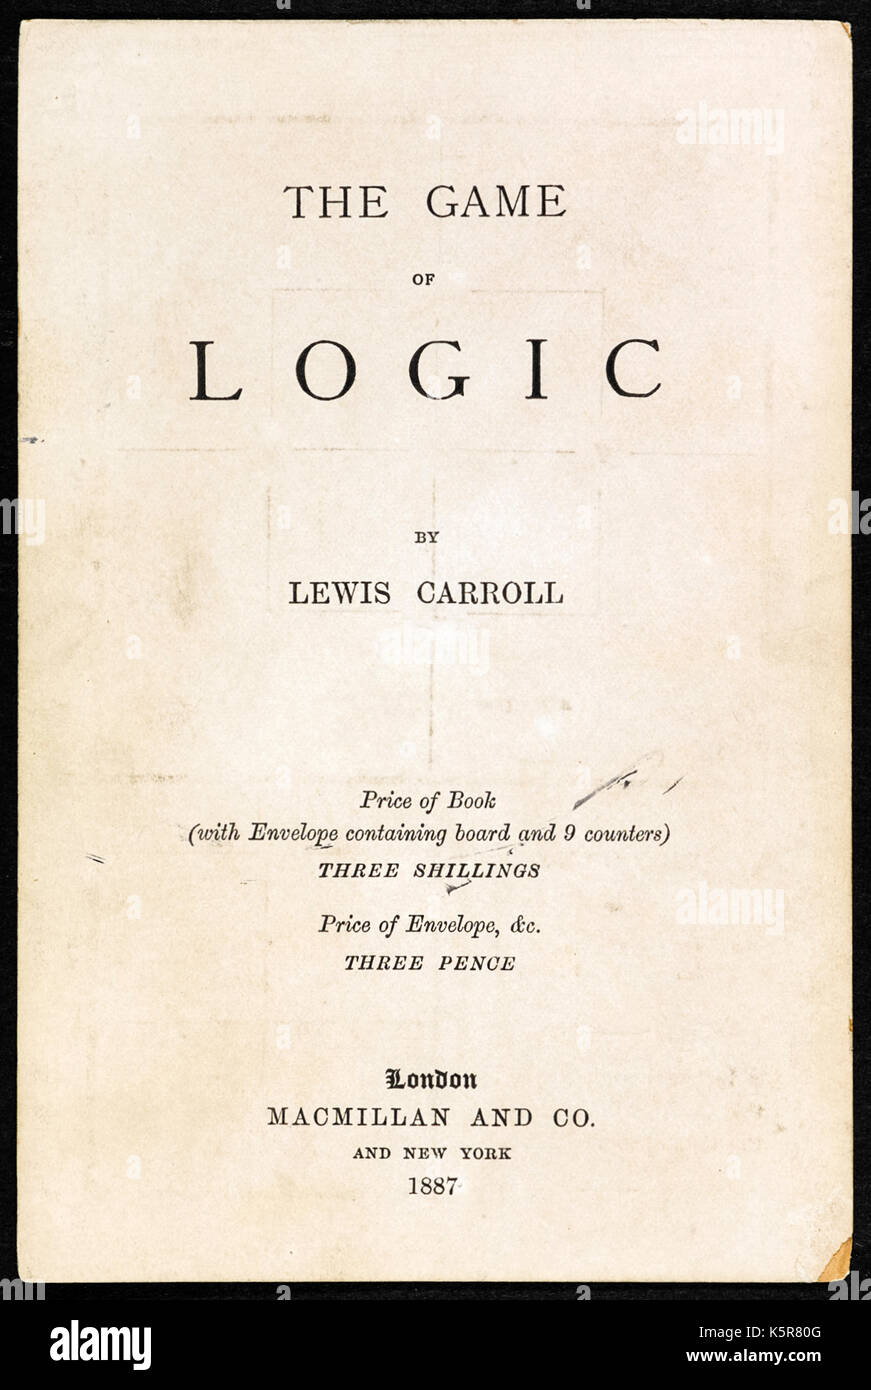 ‘The Game of Logic’ by Lewis Caroll, the pseudonym of Charles Lutwidge Dodgson (1832-1898) in 1887. Dodgson was a mathematician and this game challenged ‘players’ to denote various logical statements. Photograph of title page. See more information below. Stock Photo